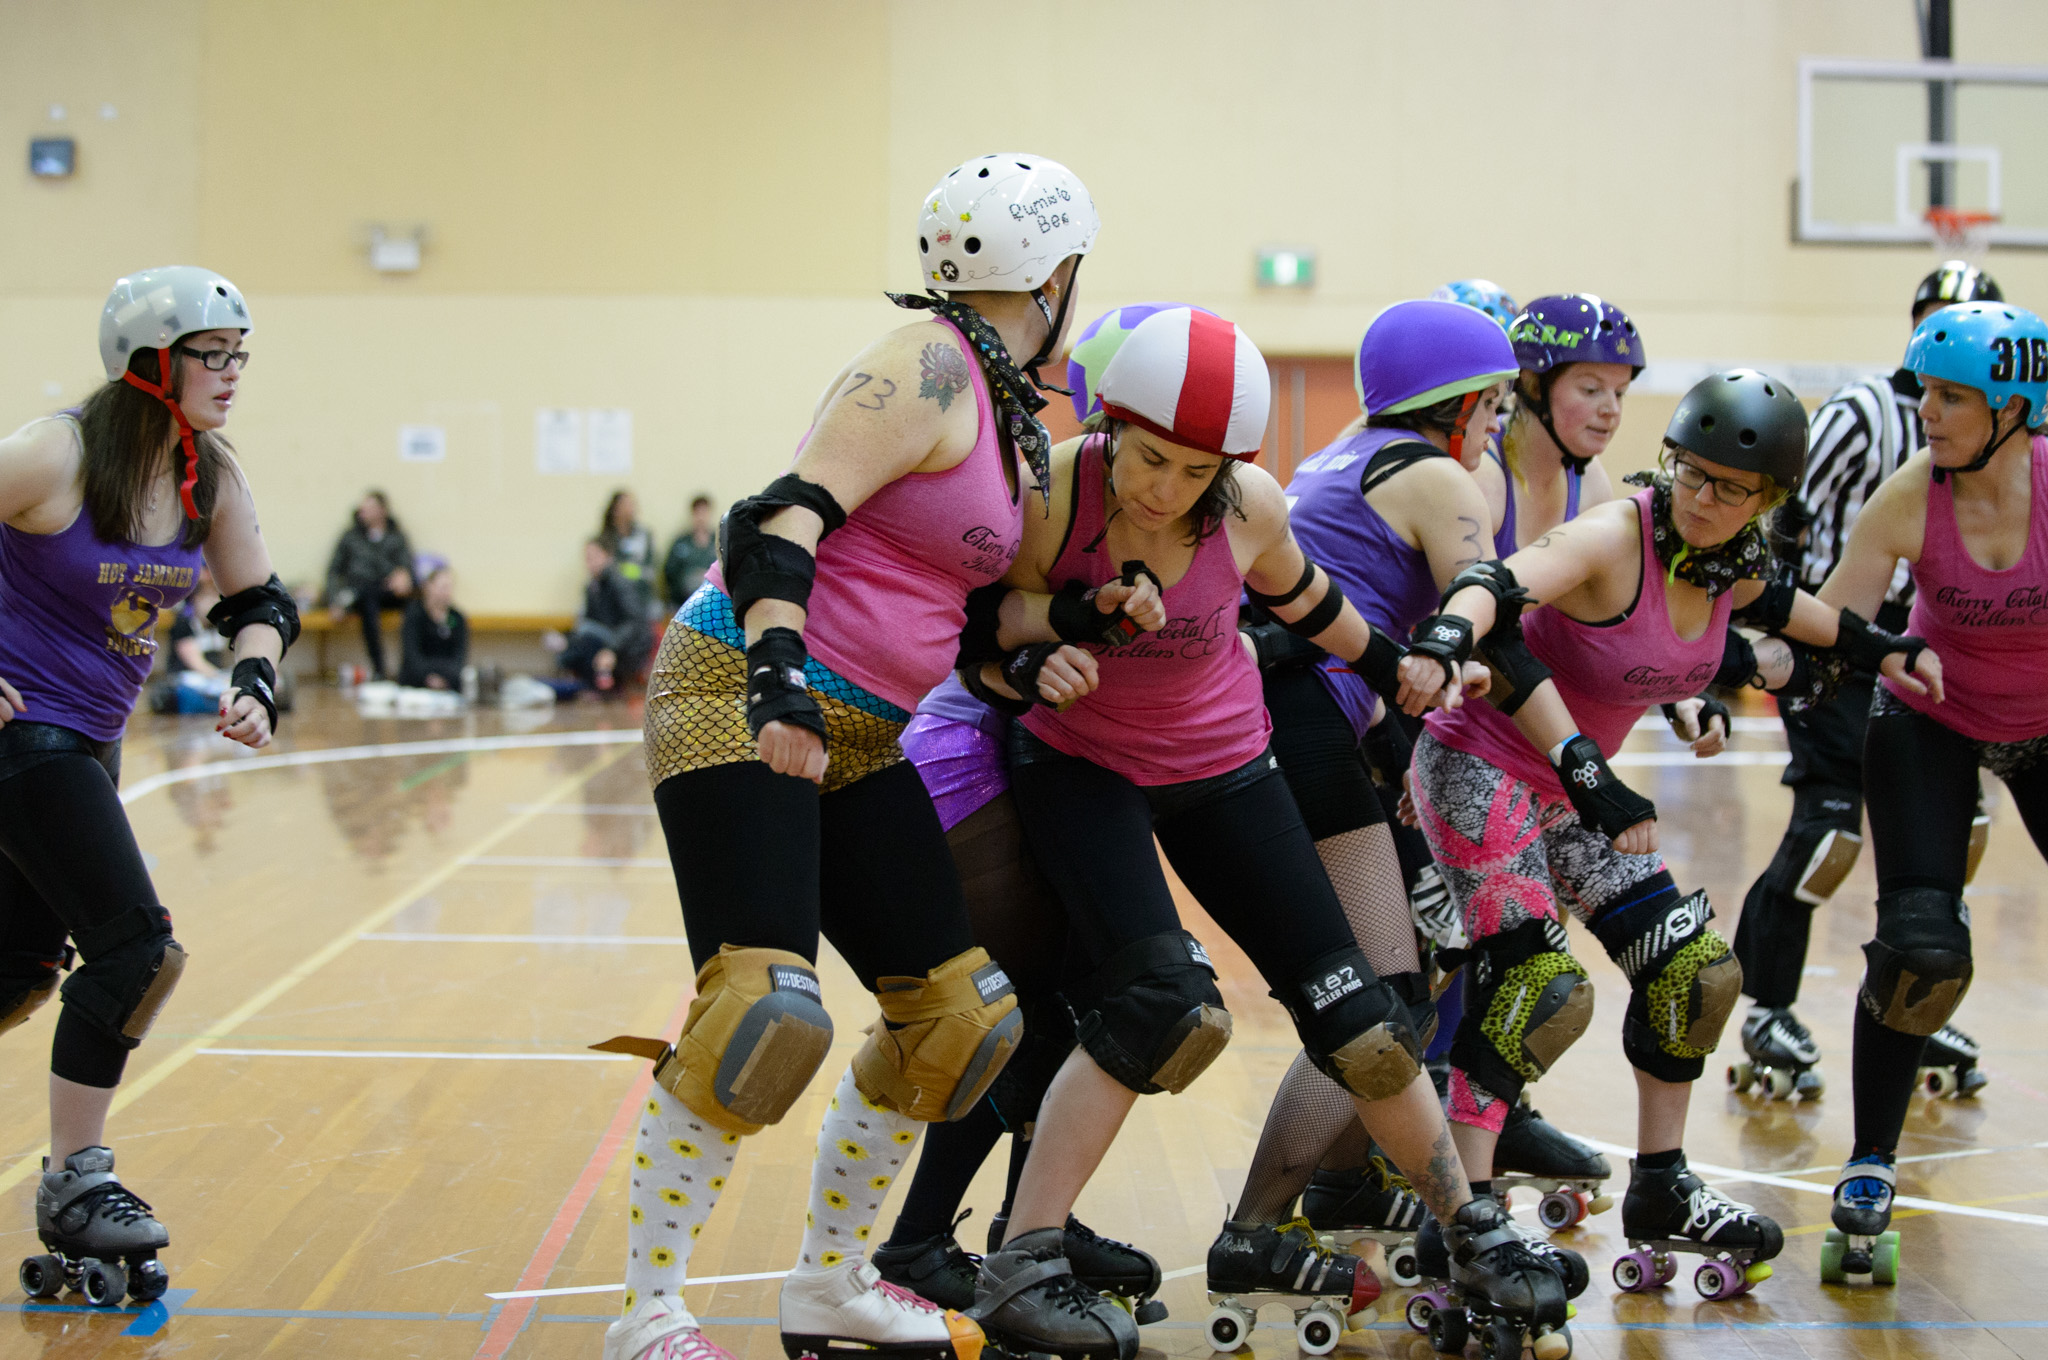 Cherry Cola Rollers v Hot Jammer Donuts. Photographer: Brett Sargeant, D-eye Photography